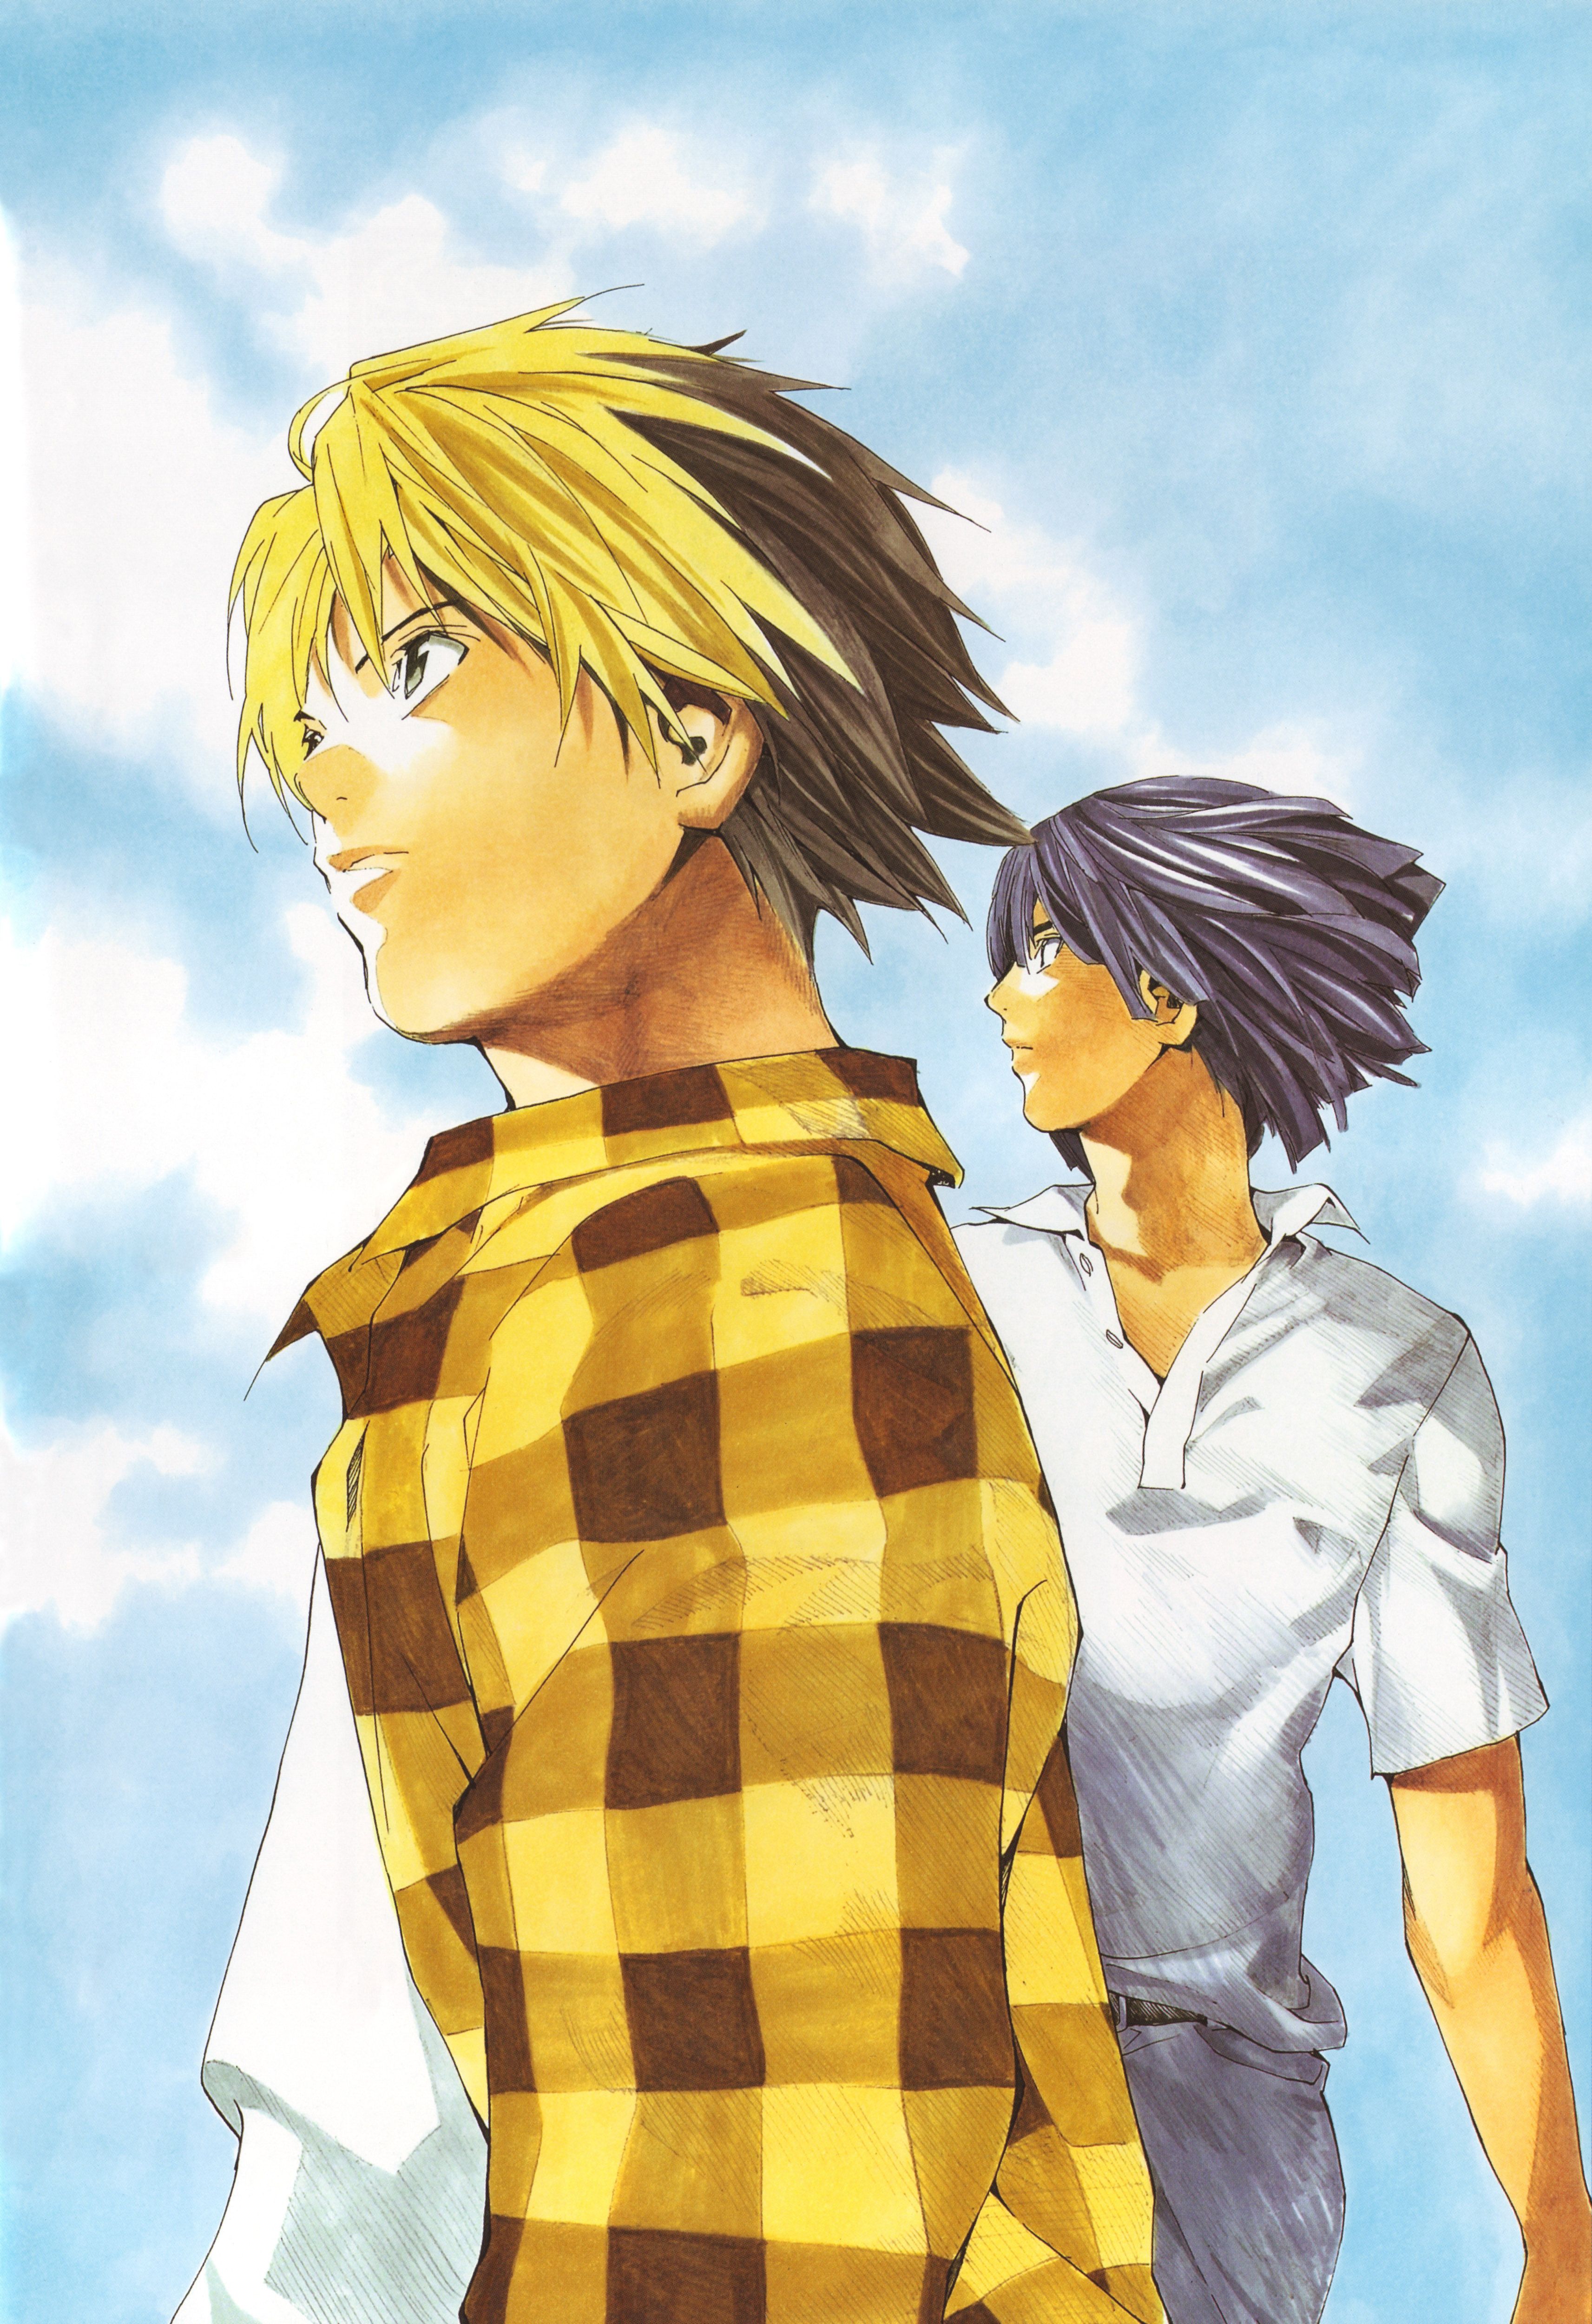 Hikaru No Go wallpapers for desktop, download free Hikaru No Go pictures  and backgrounds for PC